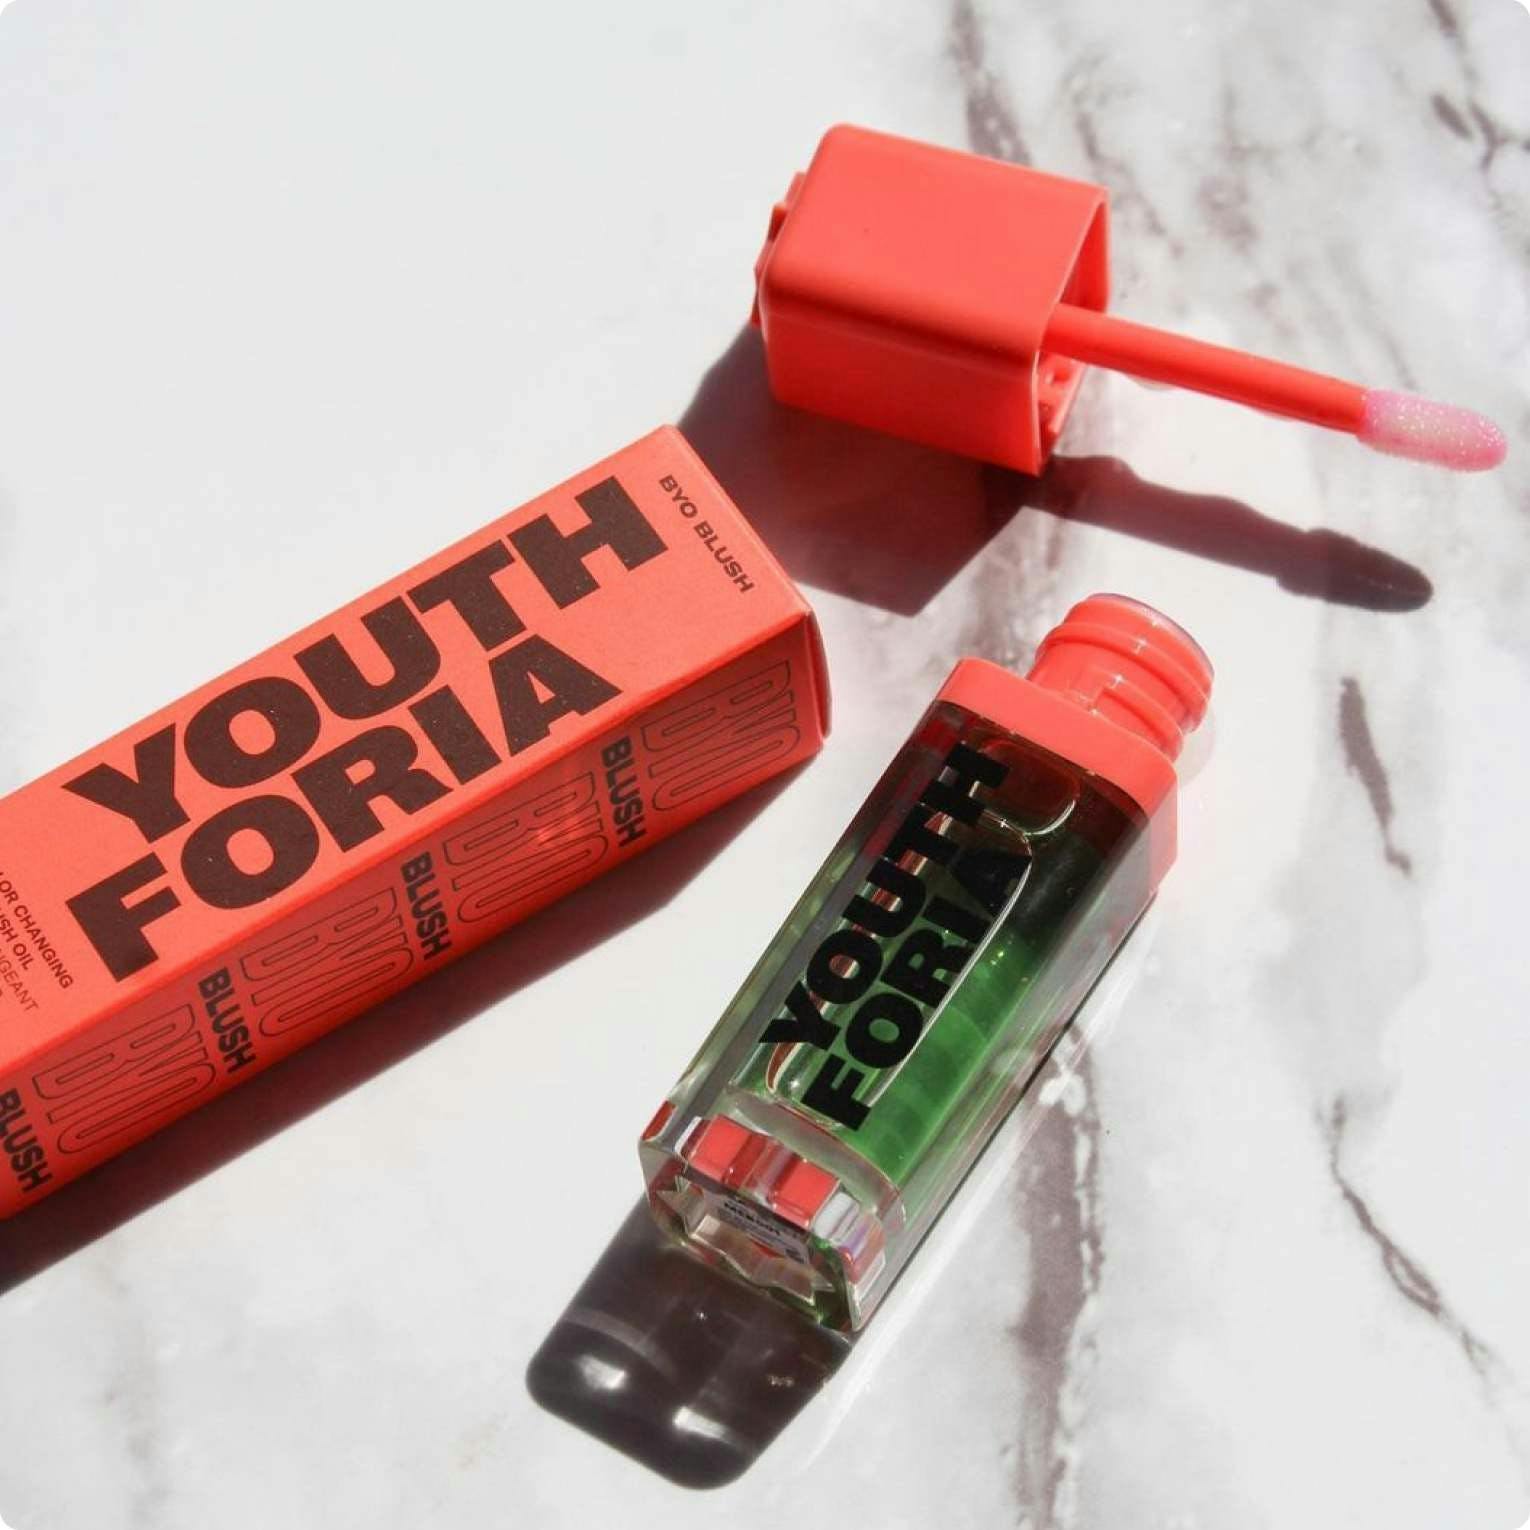 Bright orange product shot of Youthforia on a white marble table